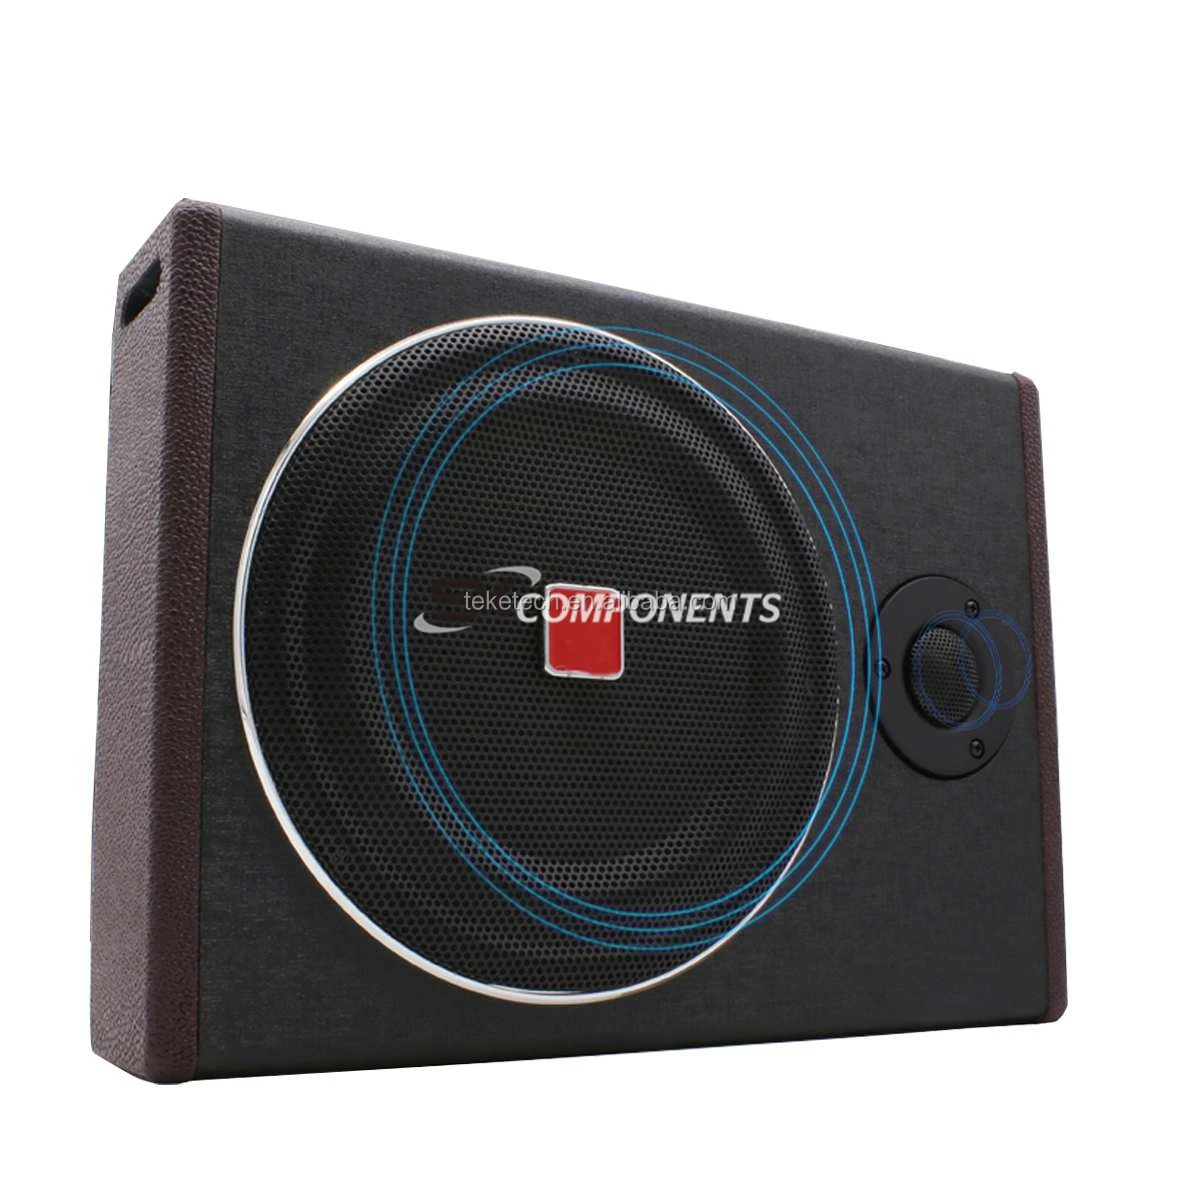 Powered Car Subwoofer w/Low & High Level Inputs Pyle PLBX8A 600 Watt Compact Enclosed Active Underseat Car Audio Subwoofer with Built in Amp 8-Inch Low-Profile Amplified Subwoofer System 